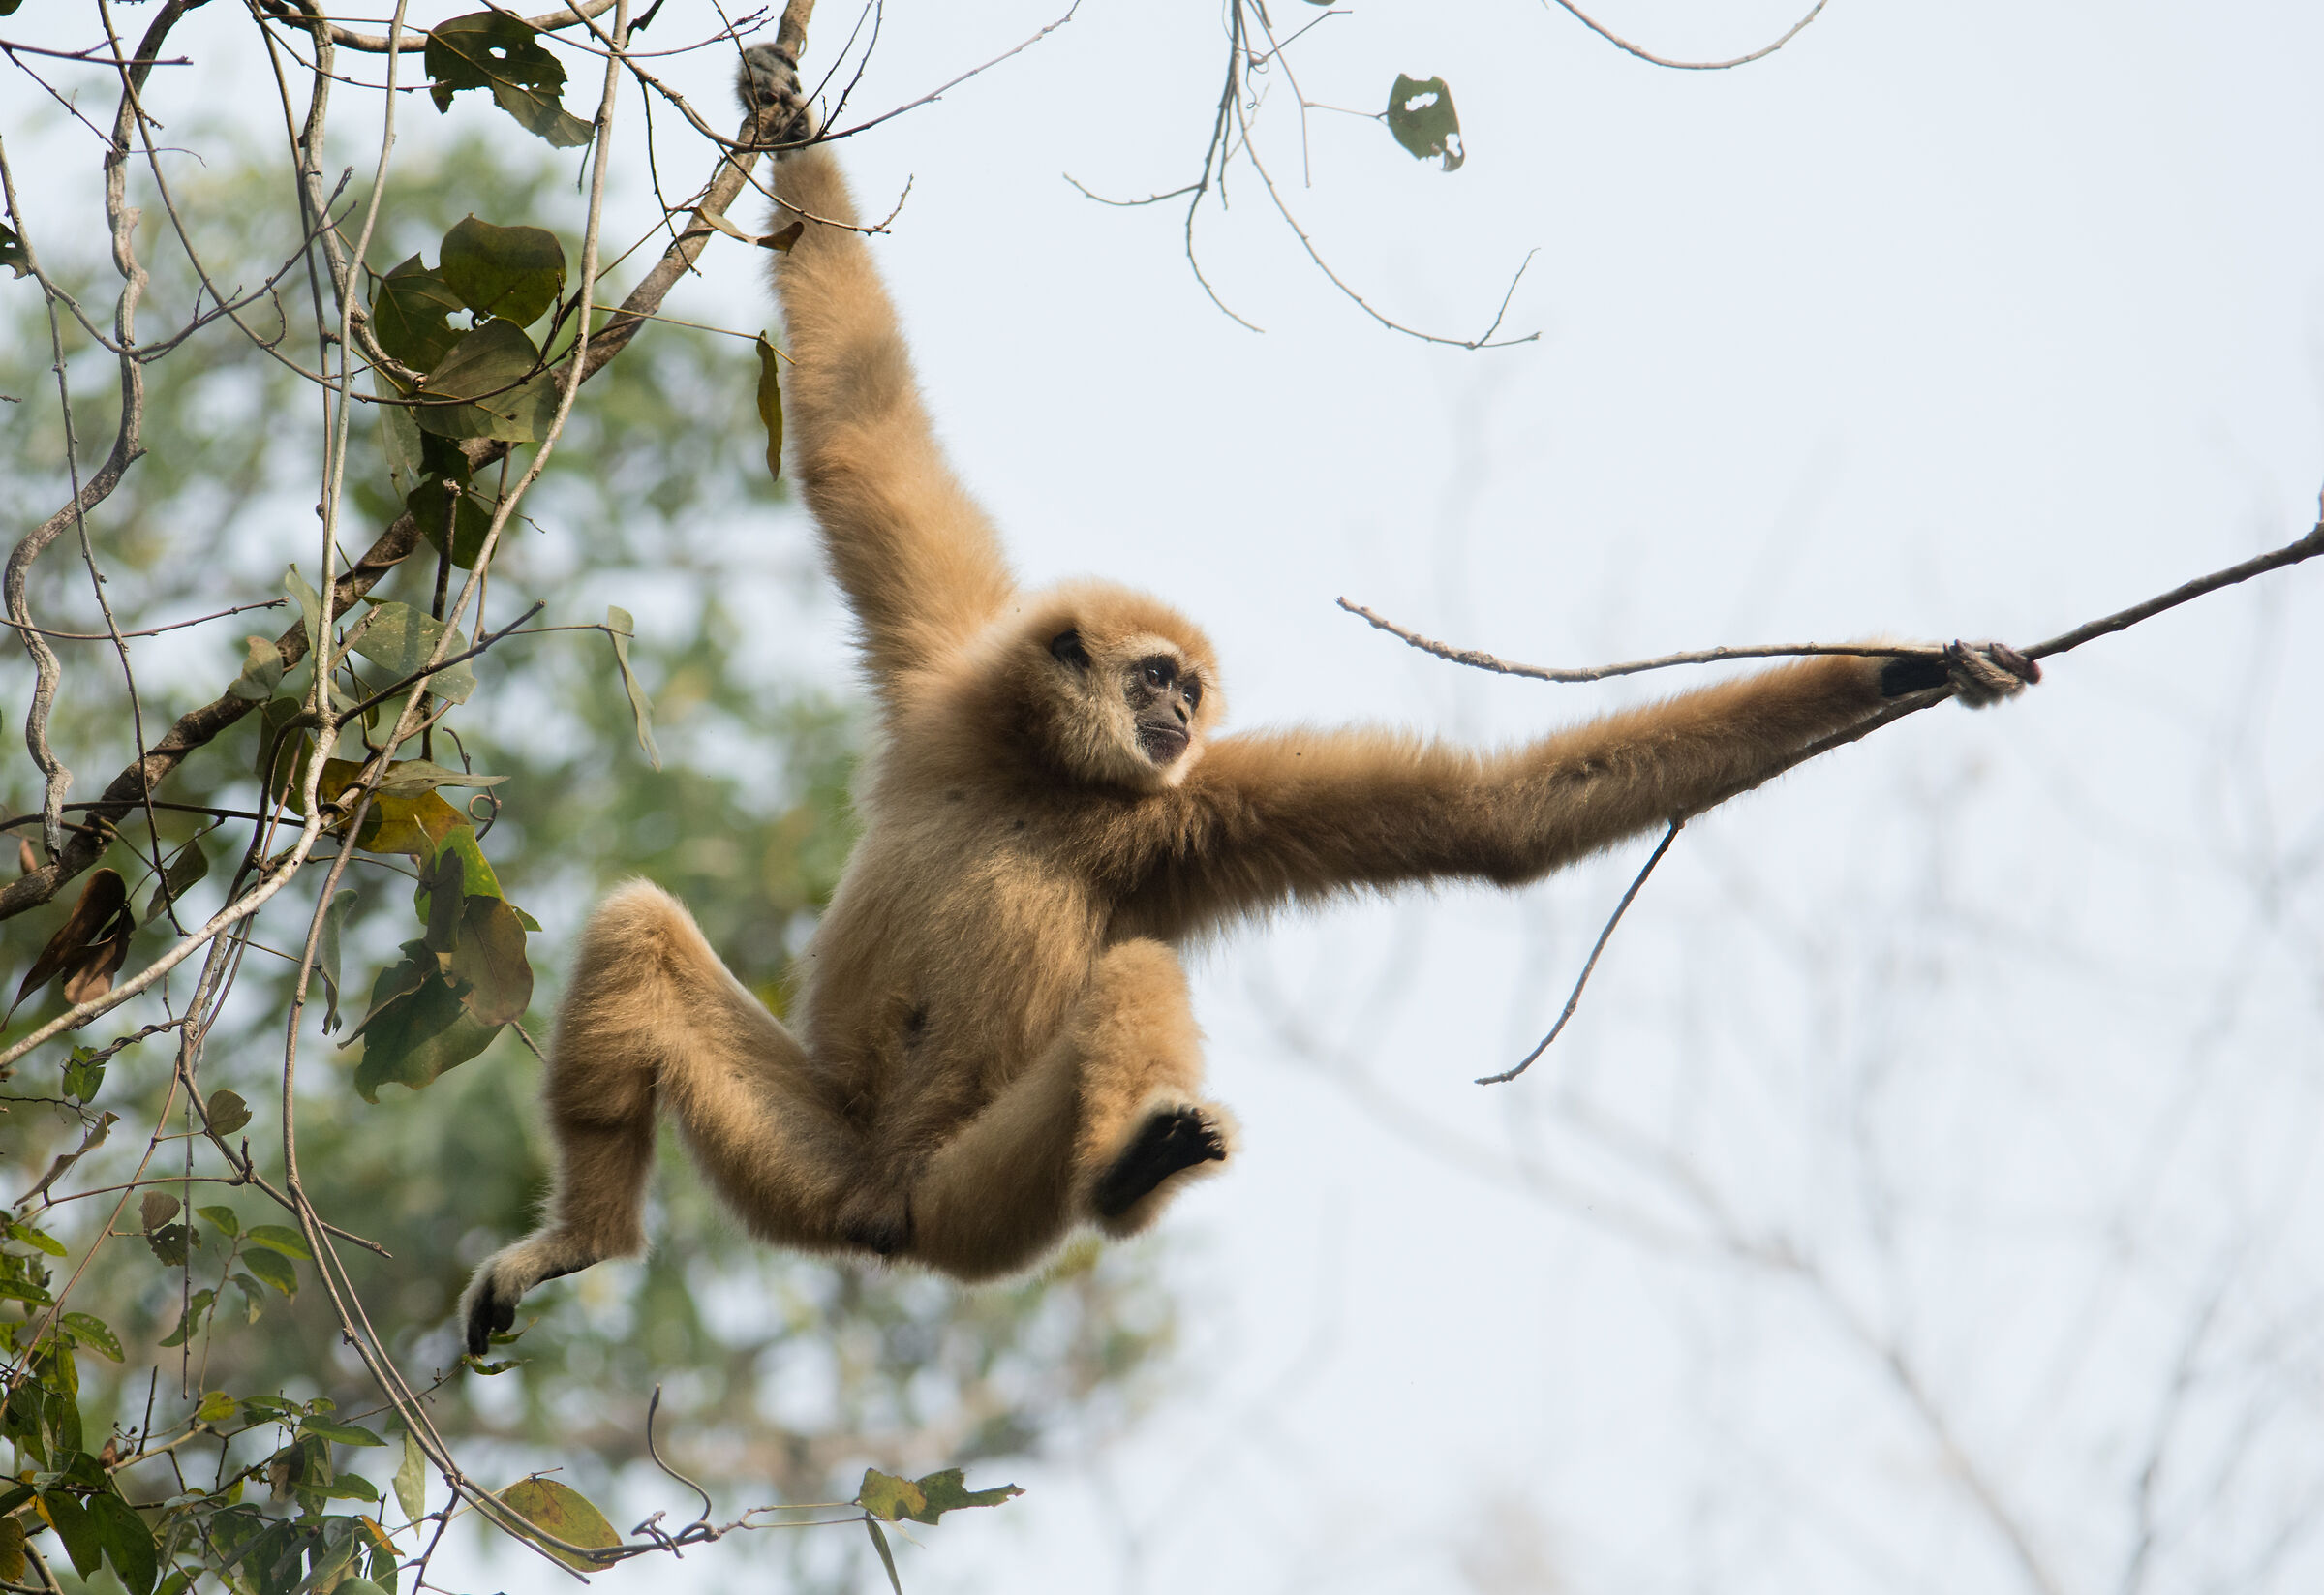 White handed gibbon - On the move...